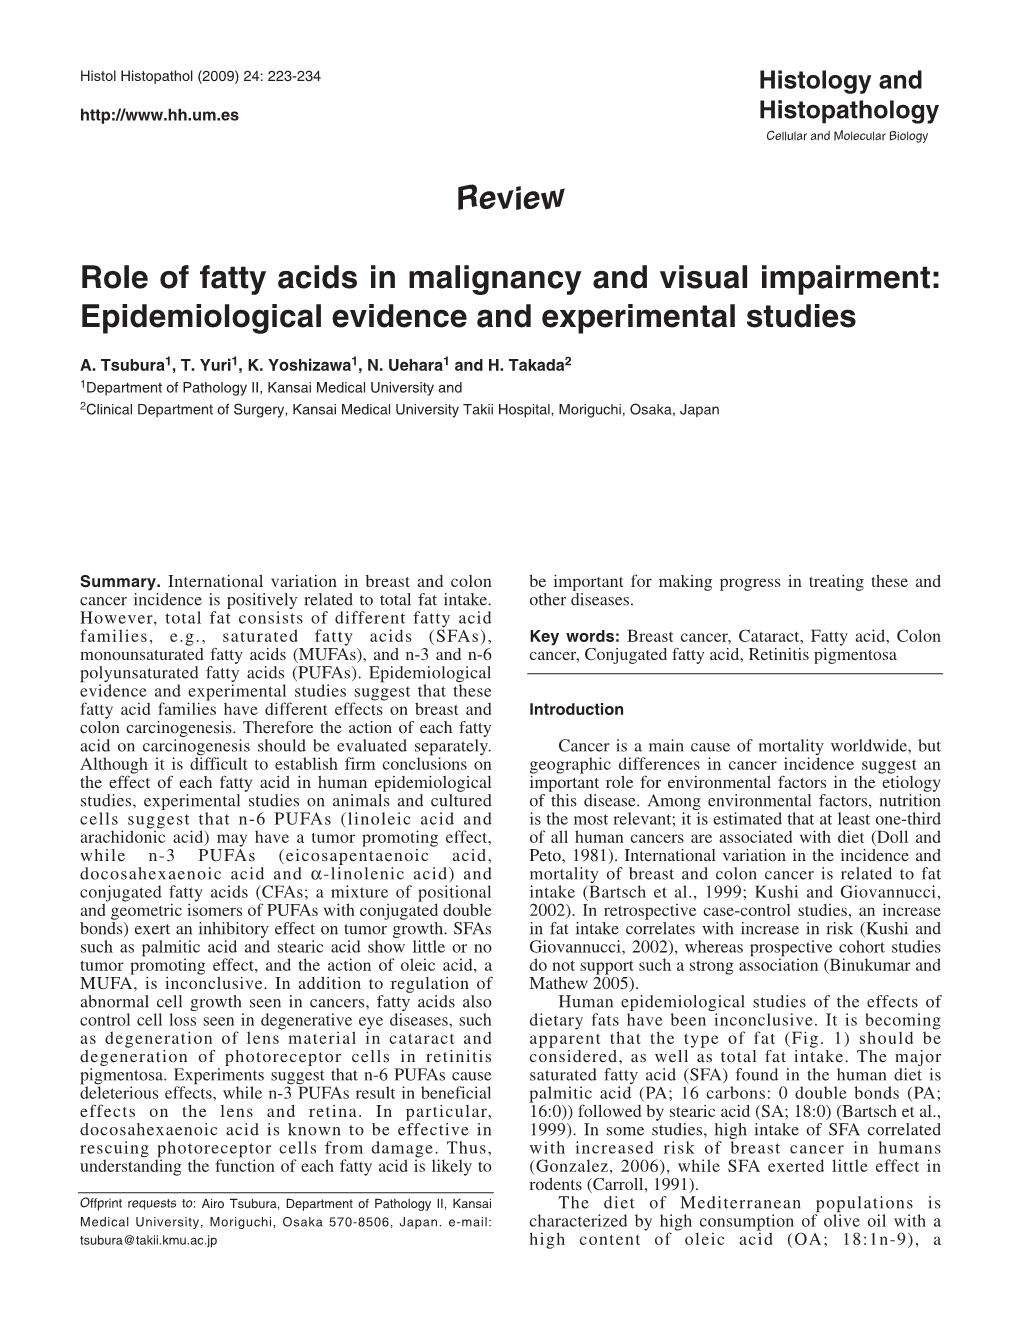 Review Role of Fatty Acids in Malignancy and Visual Impairment